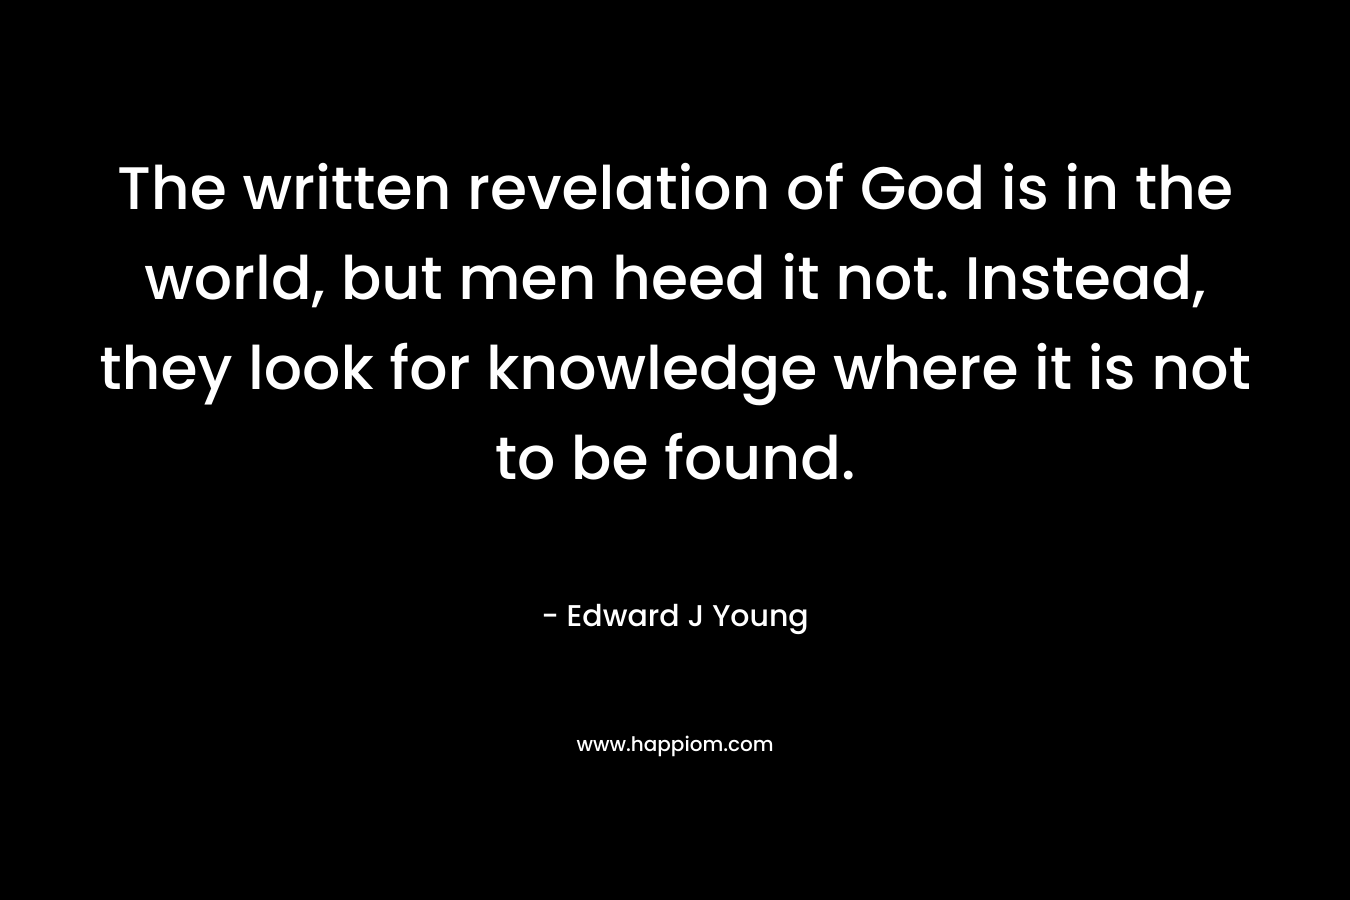 The written revelation of God is in the world, but men heed it not. Instead, they look for knowledge where it is not to be found. – Edward J Young